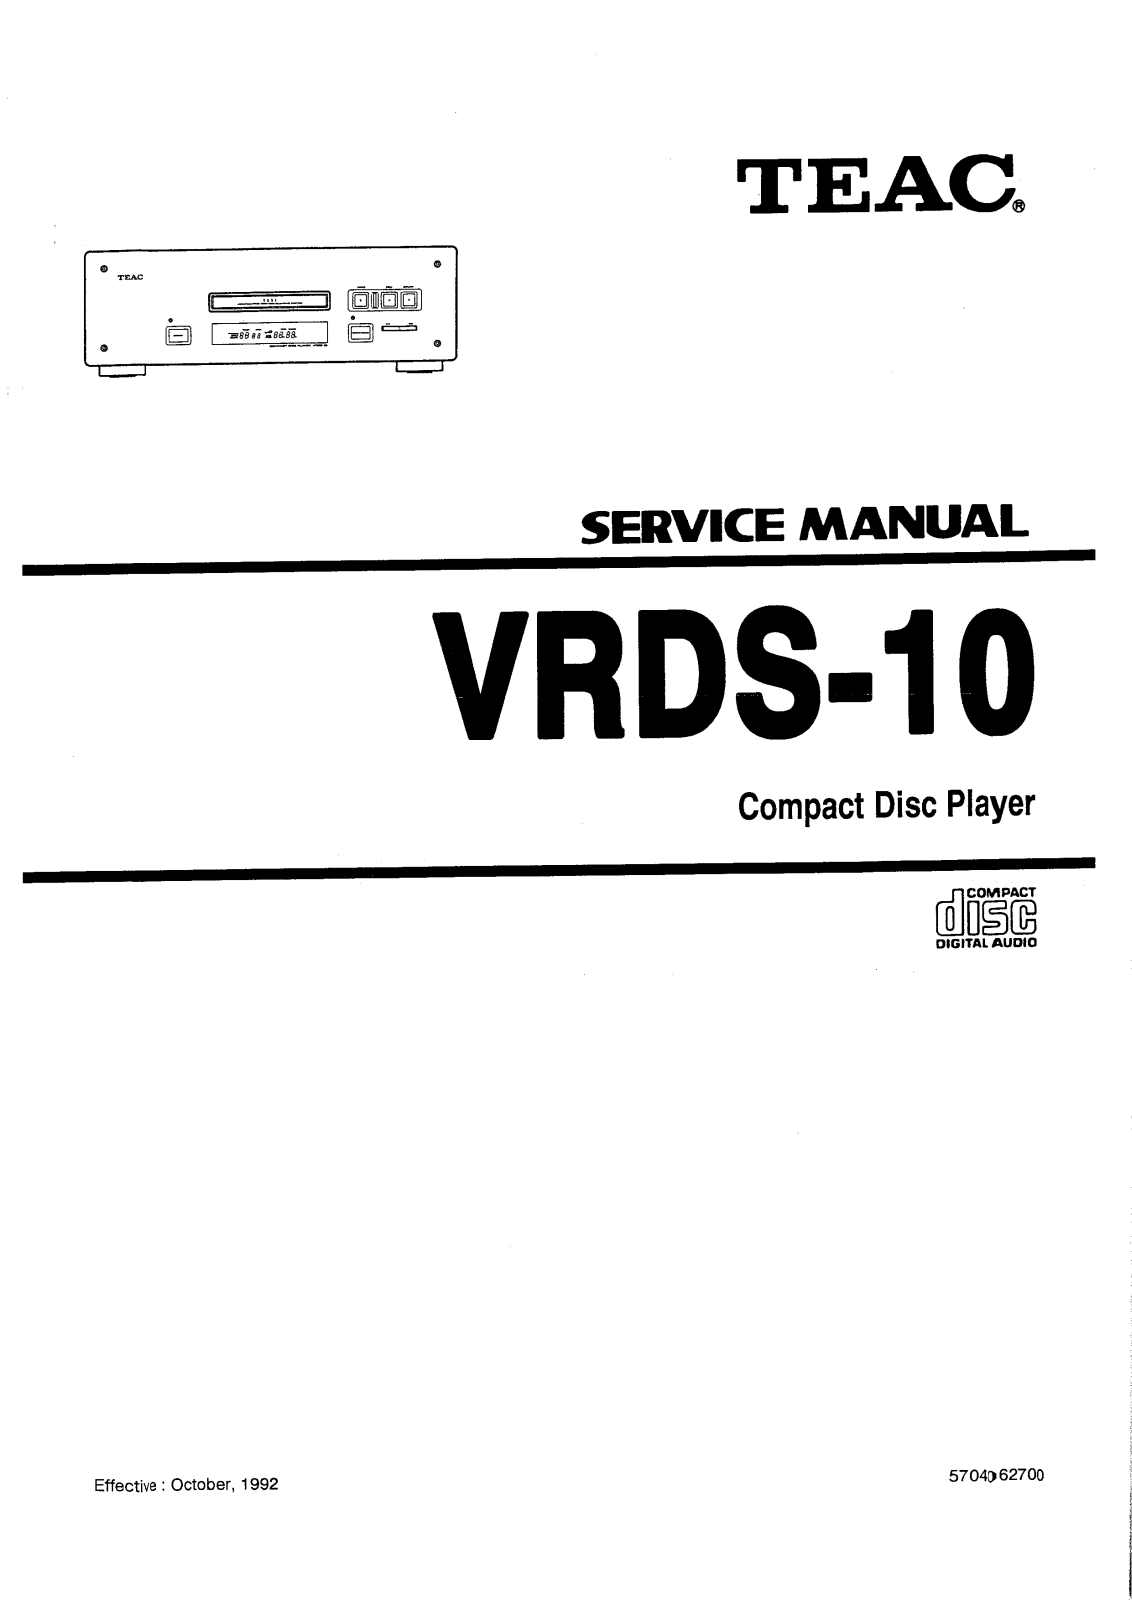 TEAC VRDS-10 Service manual